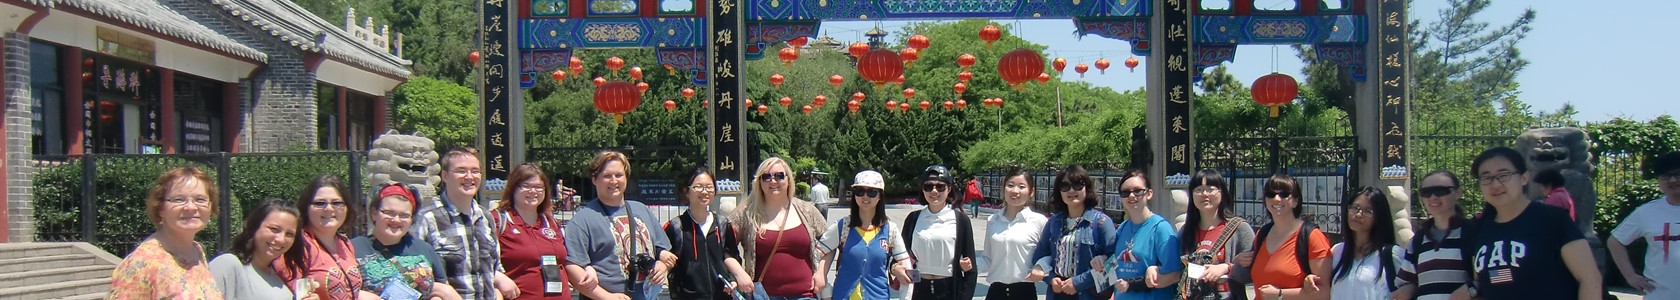 Study abroad students in front of architecture in China.